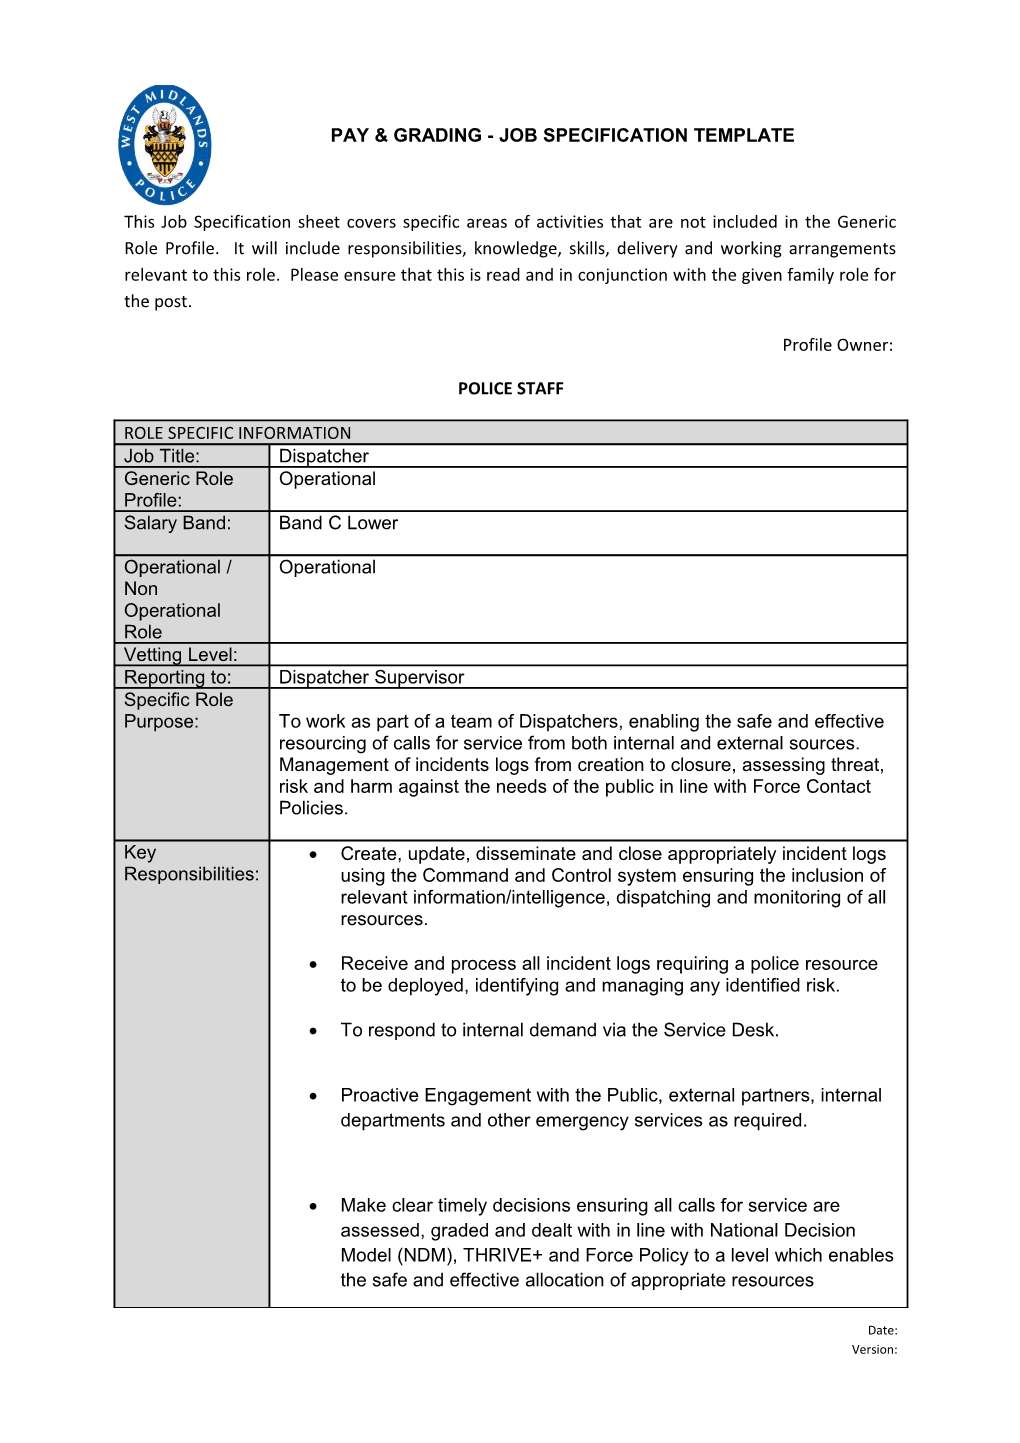 Pay & Grading - Jobspecification Template